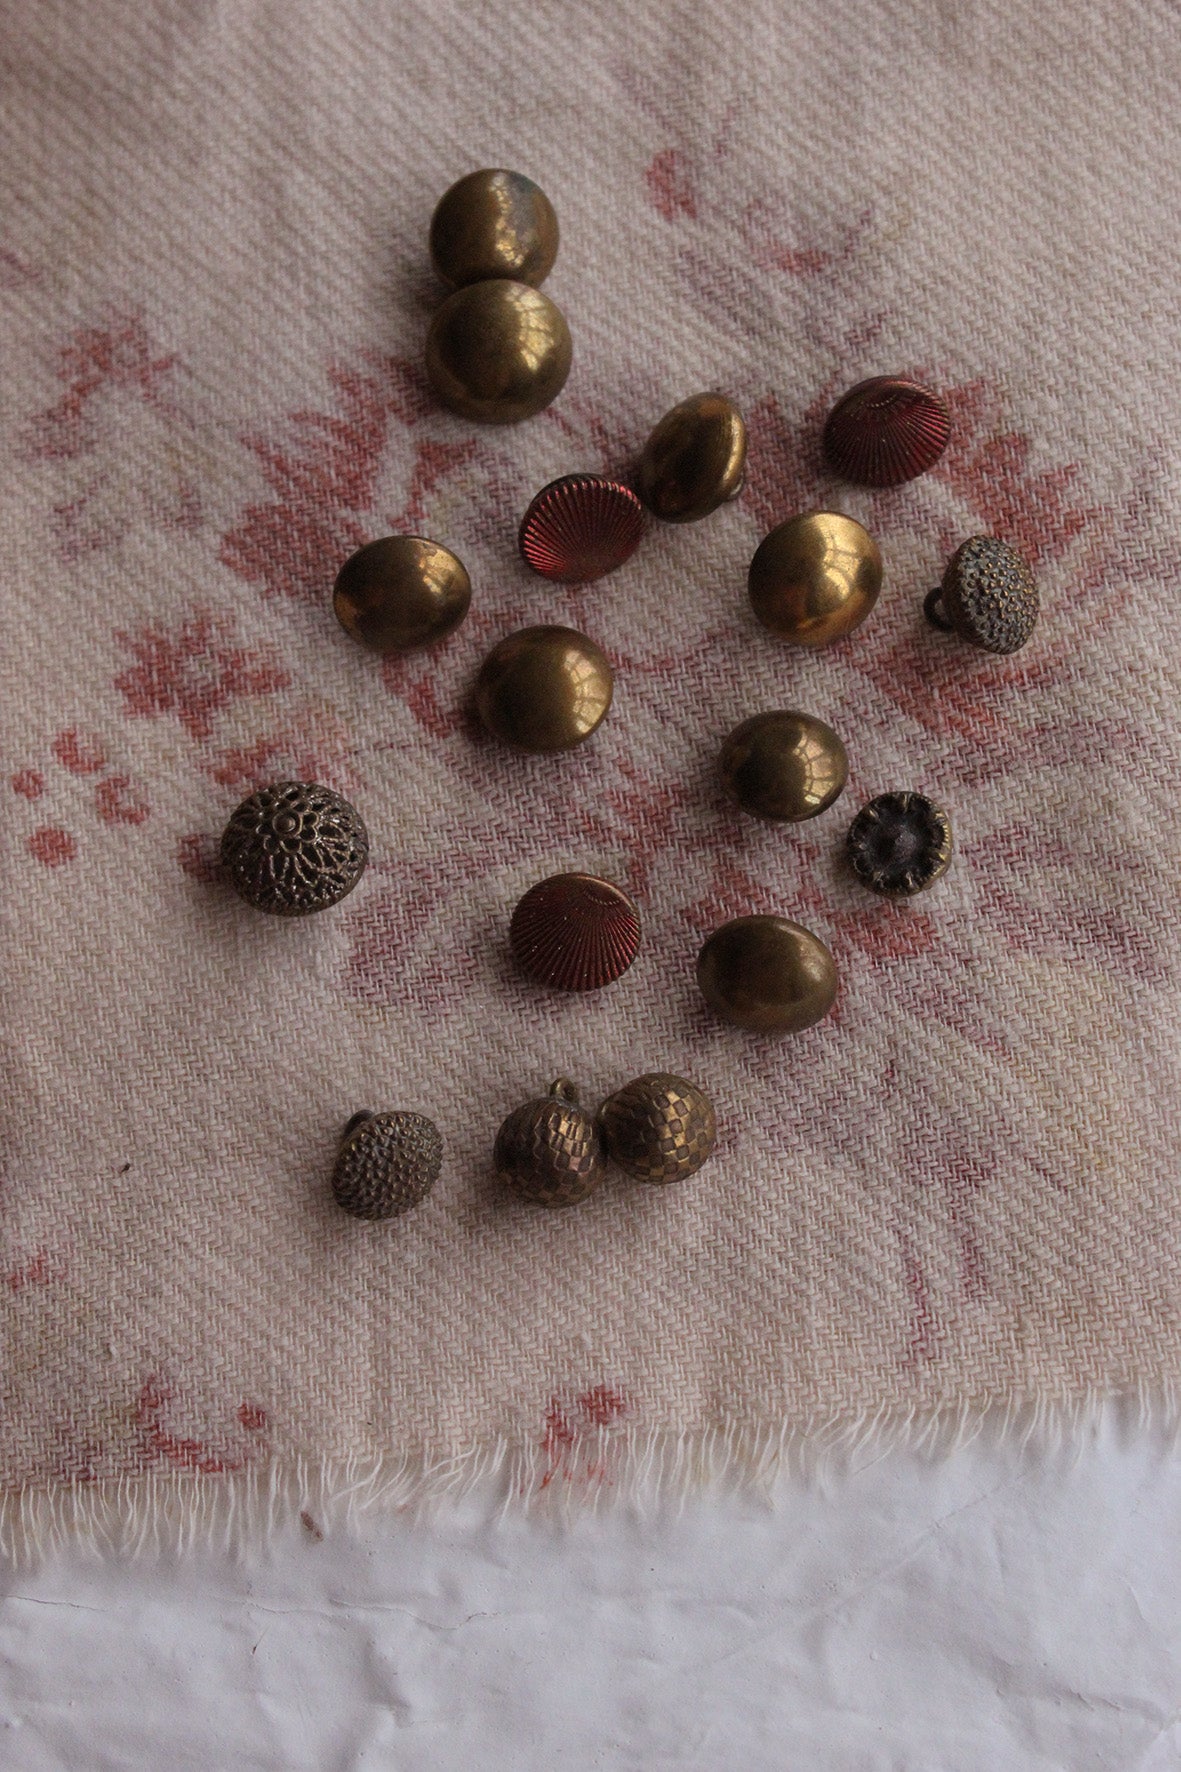 Collection of antique buttons - maninly brass